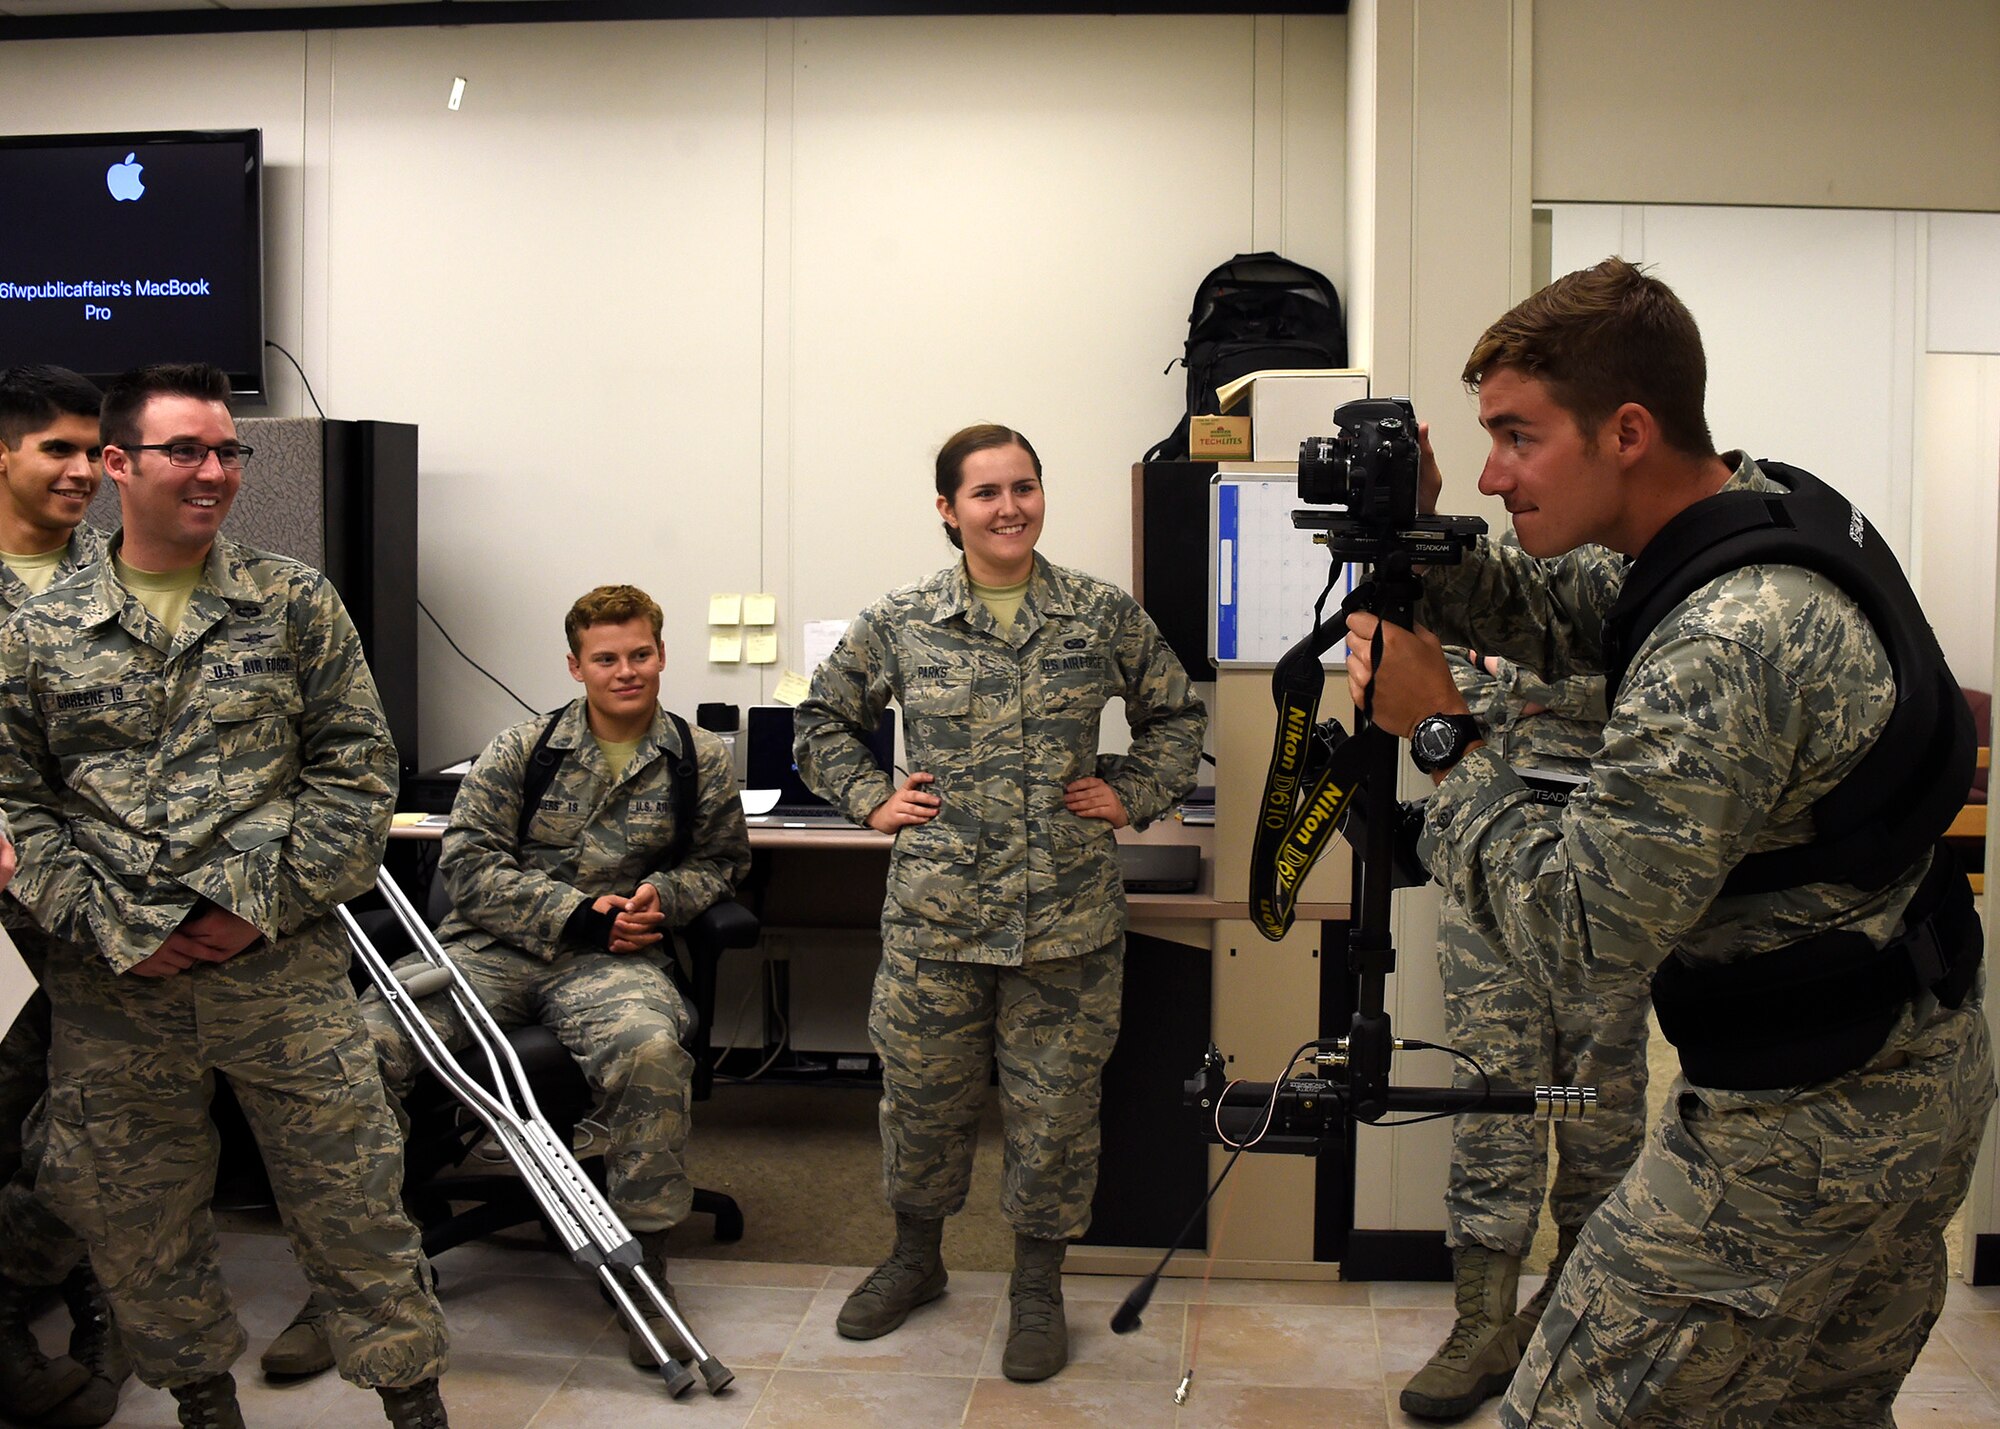 A U.S. Air Force Academy cadet uses a camera chest mount to document other cadets during their tour July 31, 2017 at Luke Air Force Base, Ariz. The purpose of the tour was to allow the cadets to shadow officers and enlisted and increase their understanding of what it will be like as a junior officer in the United States Air Force. (U.S. Air Force photo by Senior Airman Devante Williams)  